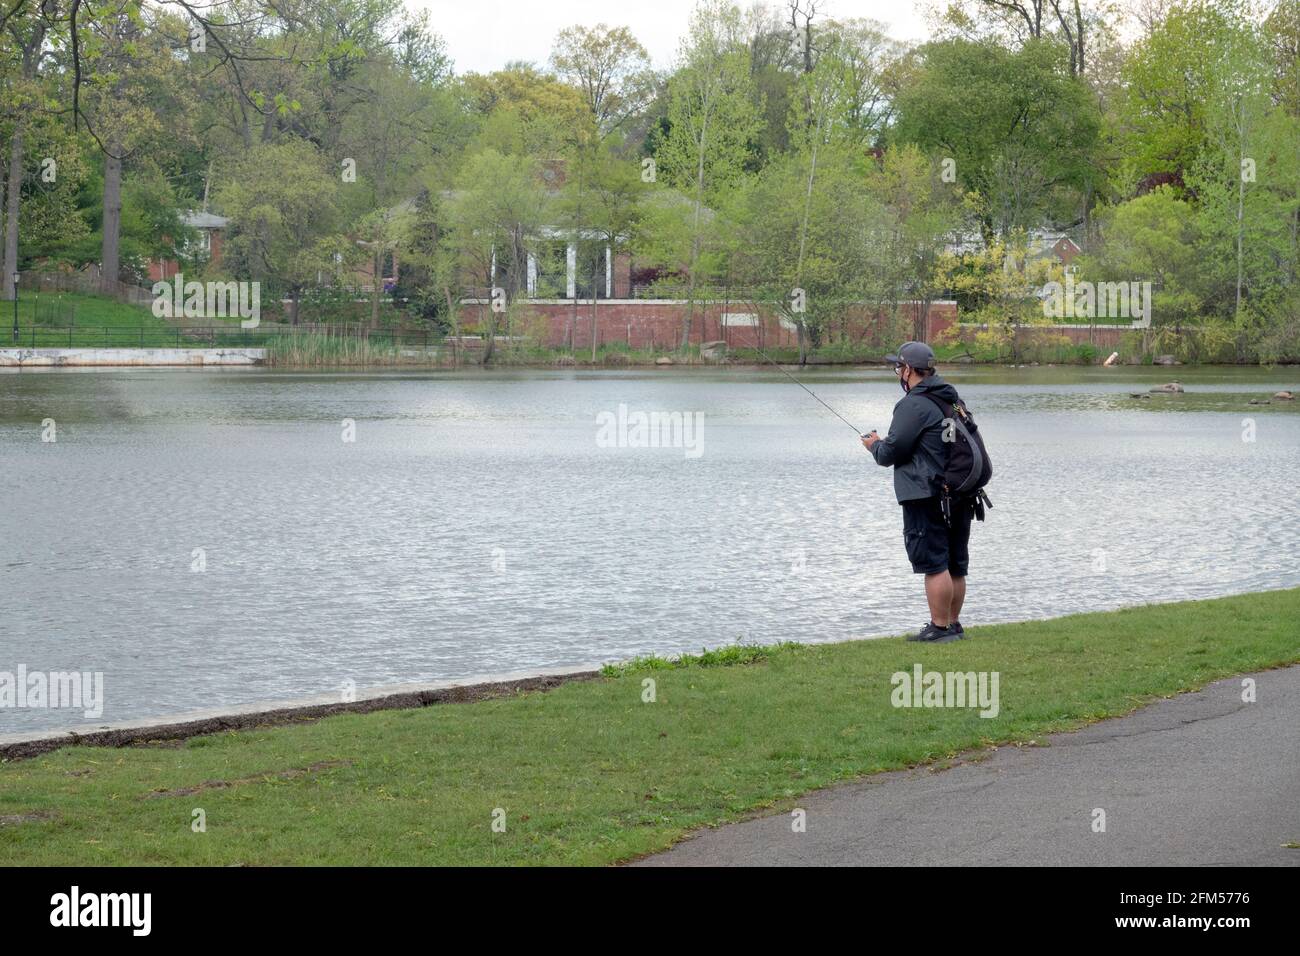 An Asian American man wearing a backpack fishes in the lake at Kissena Park in Flushing, Queens, New York City. Stock Photo